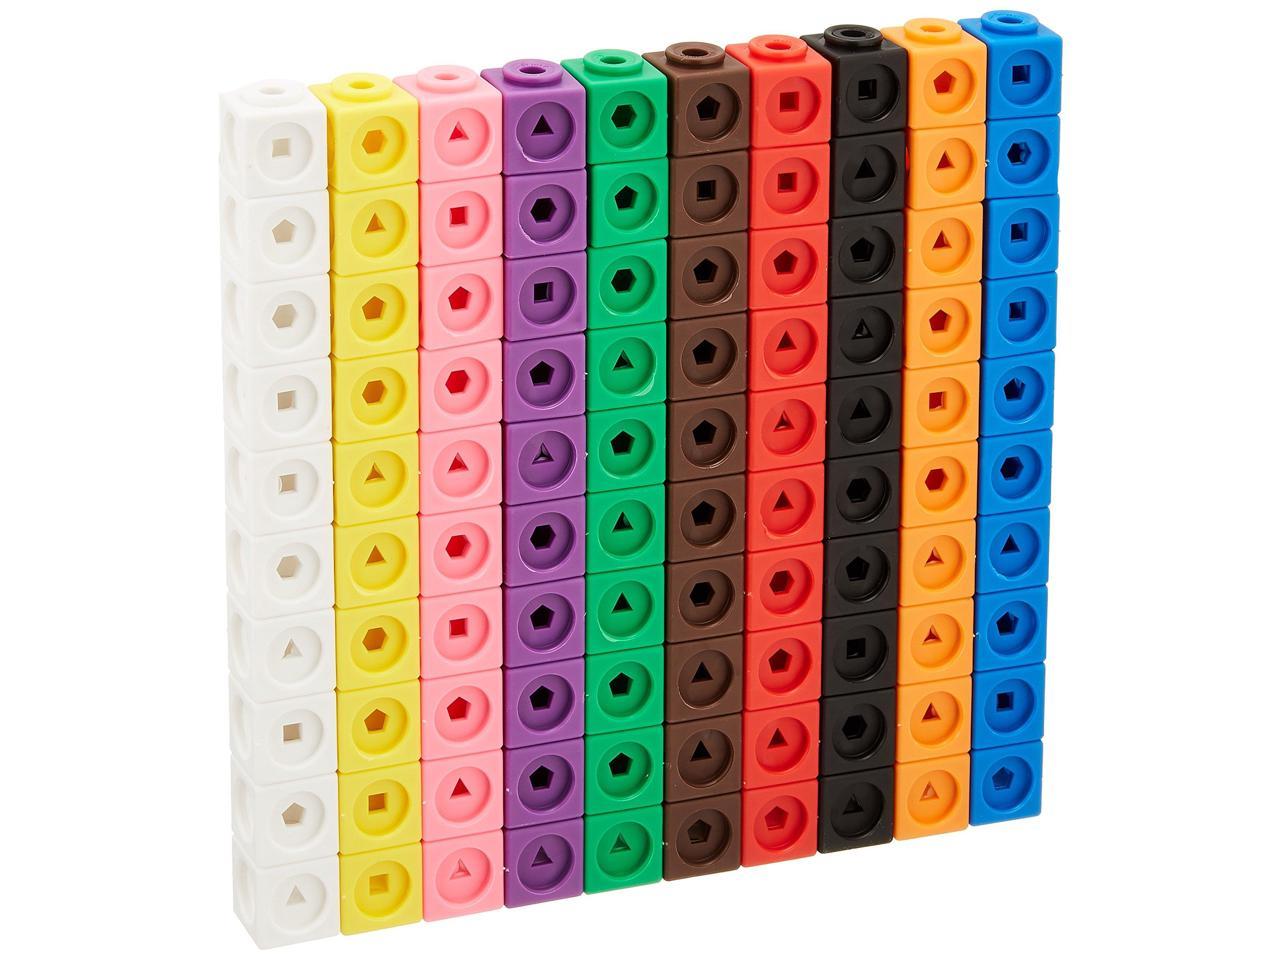 NEW Early Math Skills Home school Educational Counting Toy Mathlink Cubes 